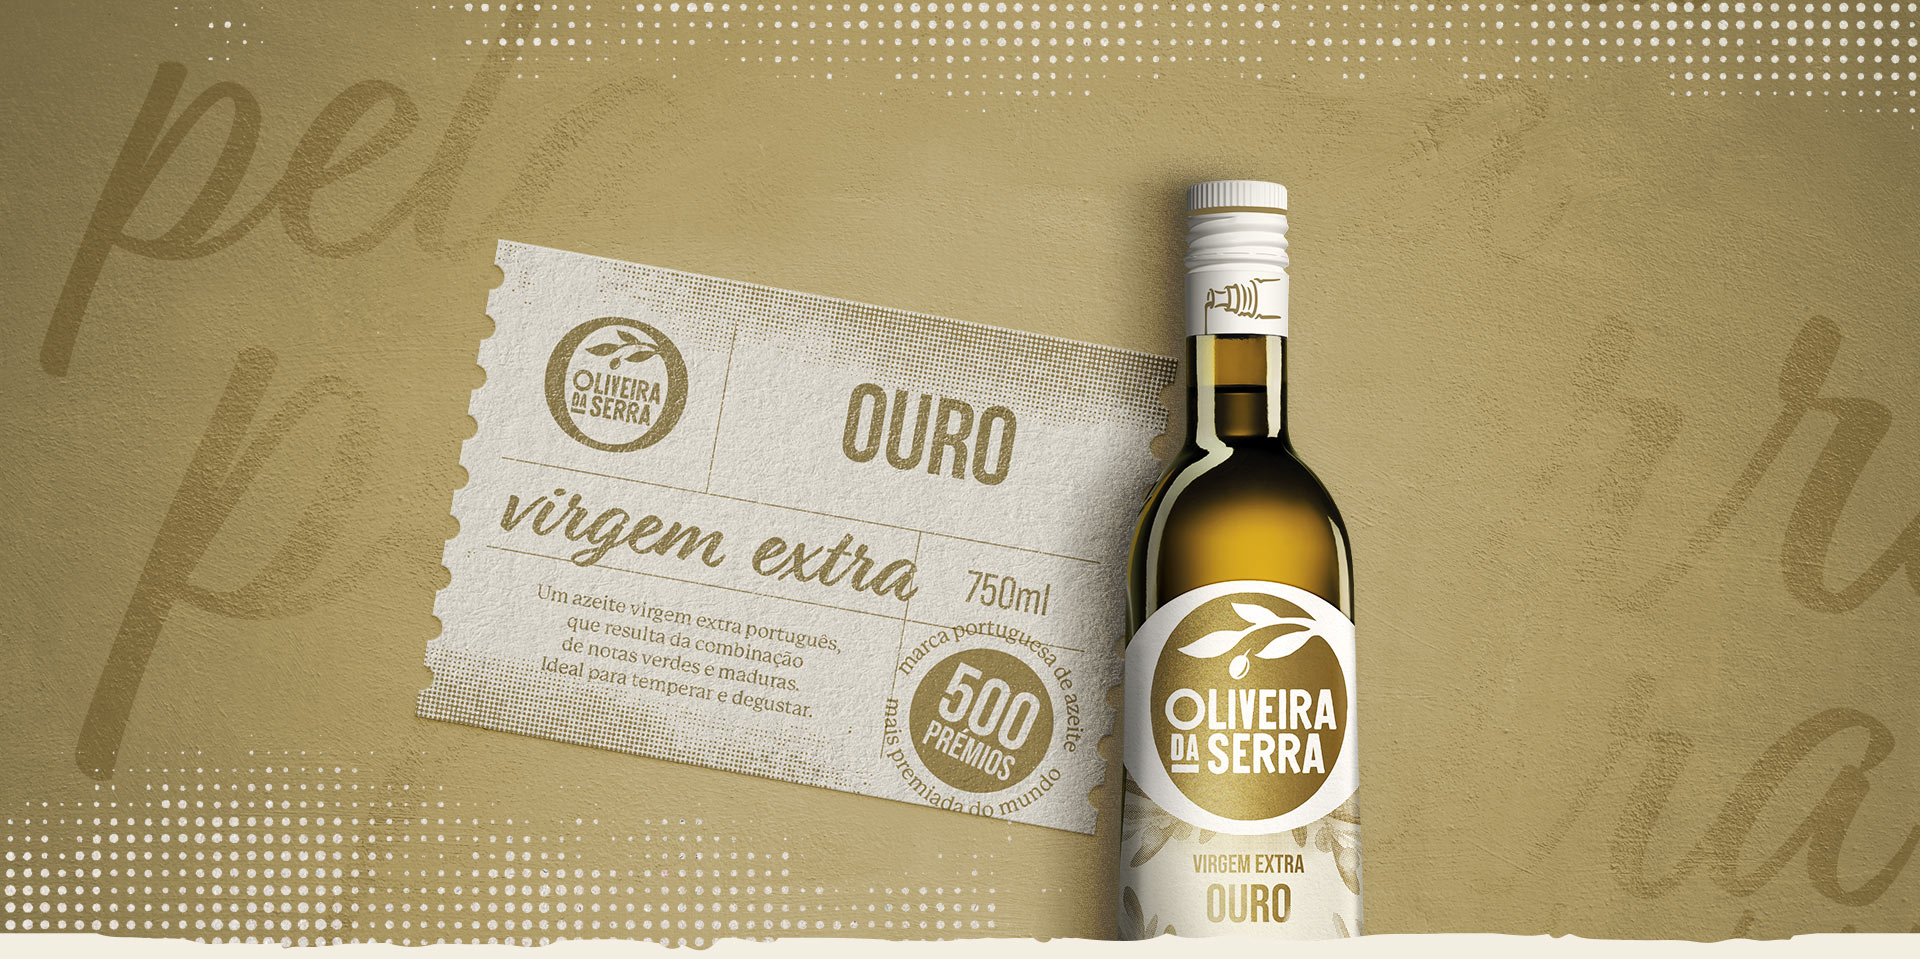 OURO